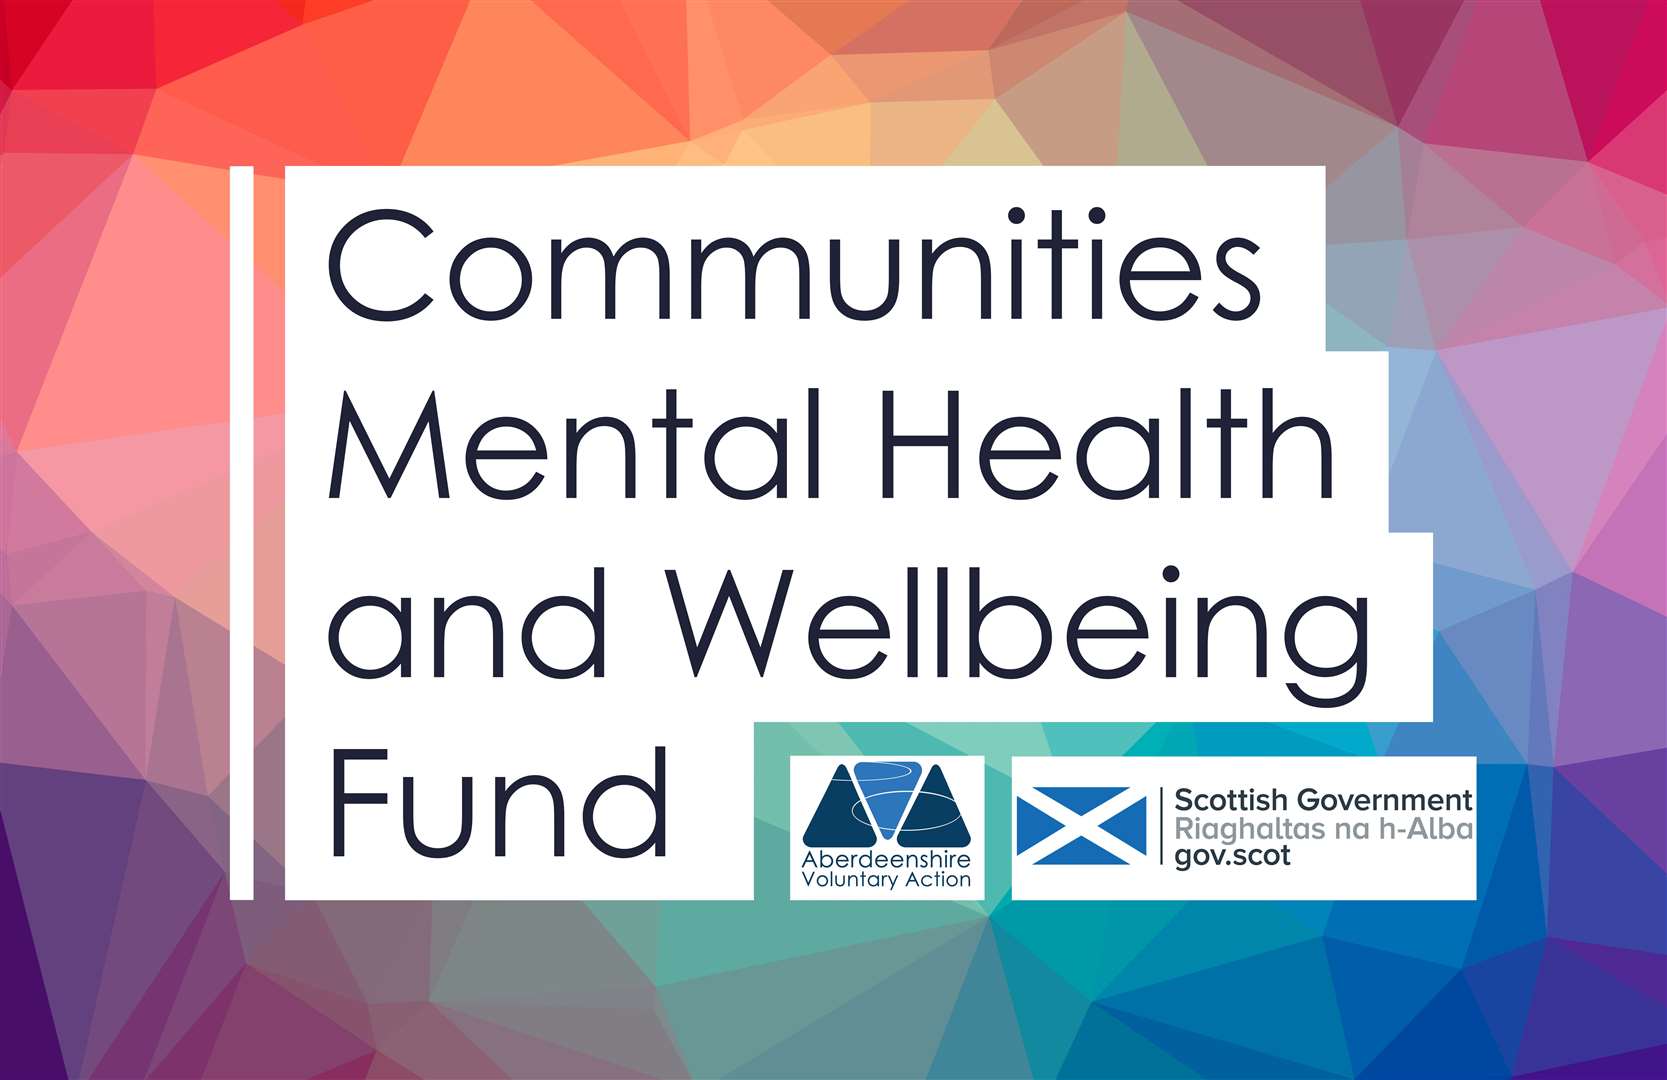 The Communities Mental Health and Wellbeing Fund has opened for applications.